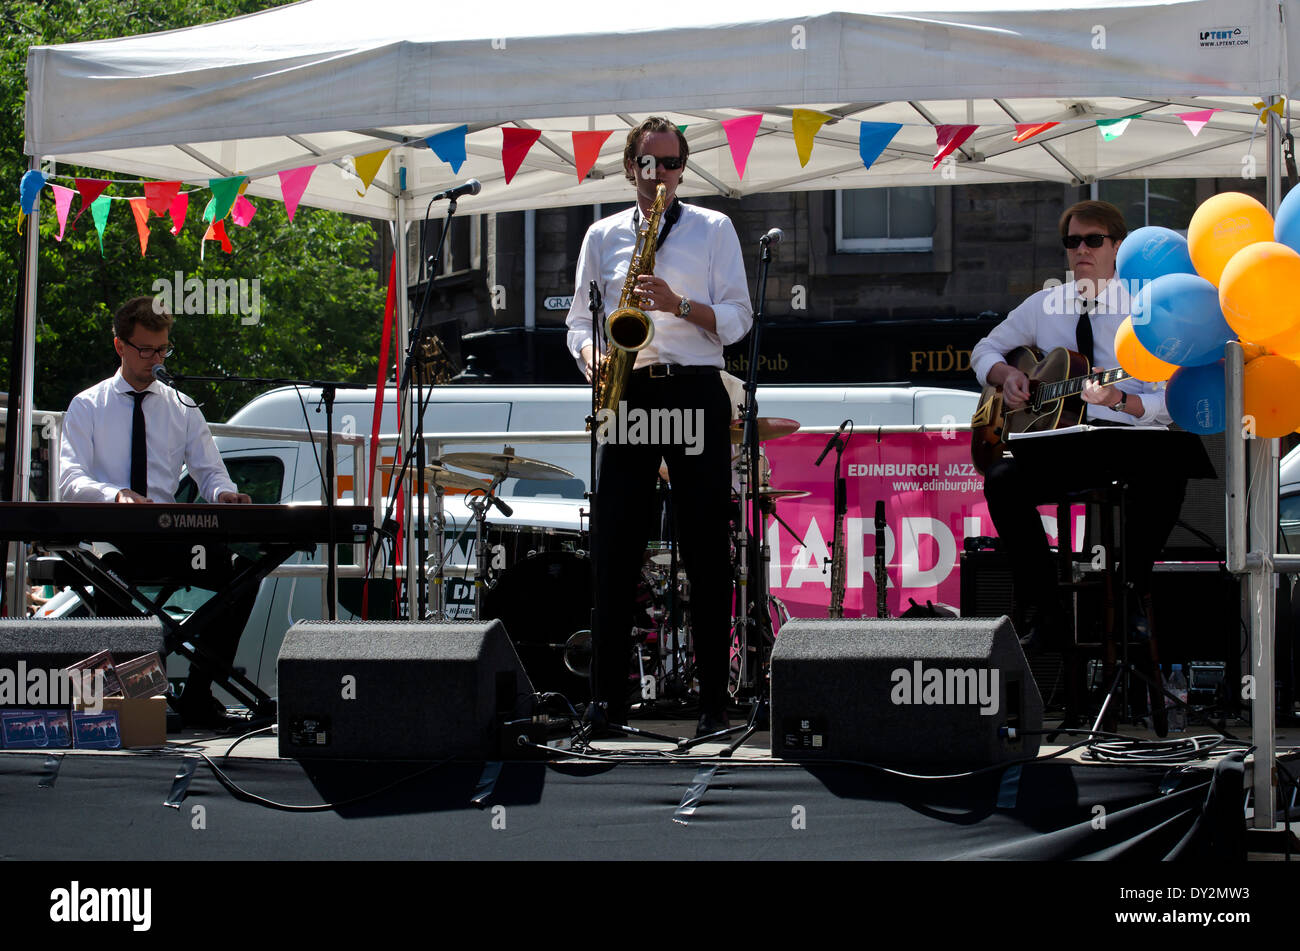 'Shreveport Rhythm' performing at the Mardi Gras, part of the Edinburgh Jazz and Blues Festival in July 2013. Stock Photo